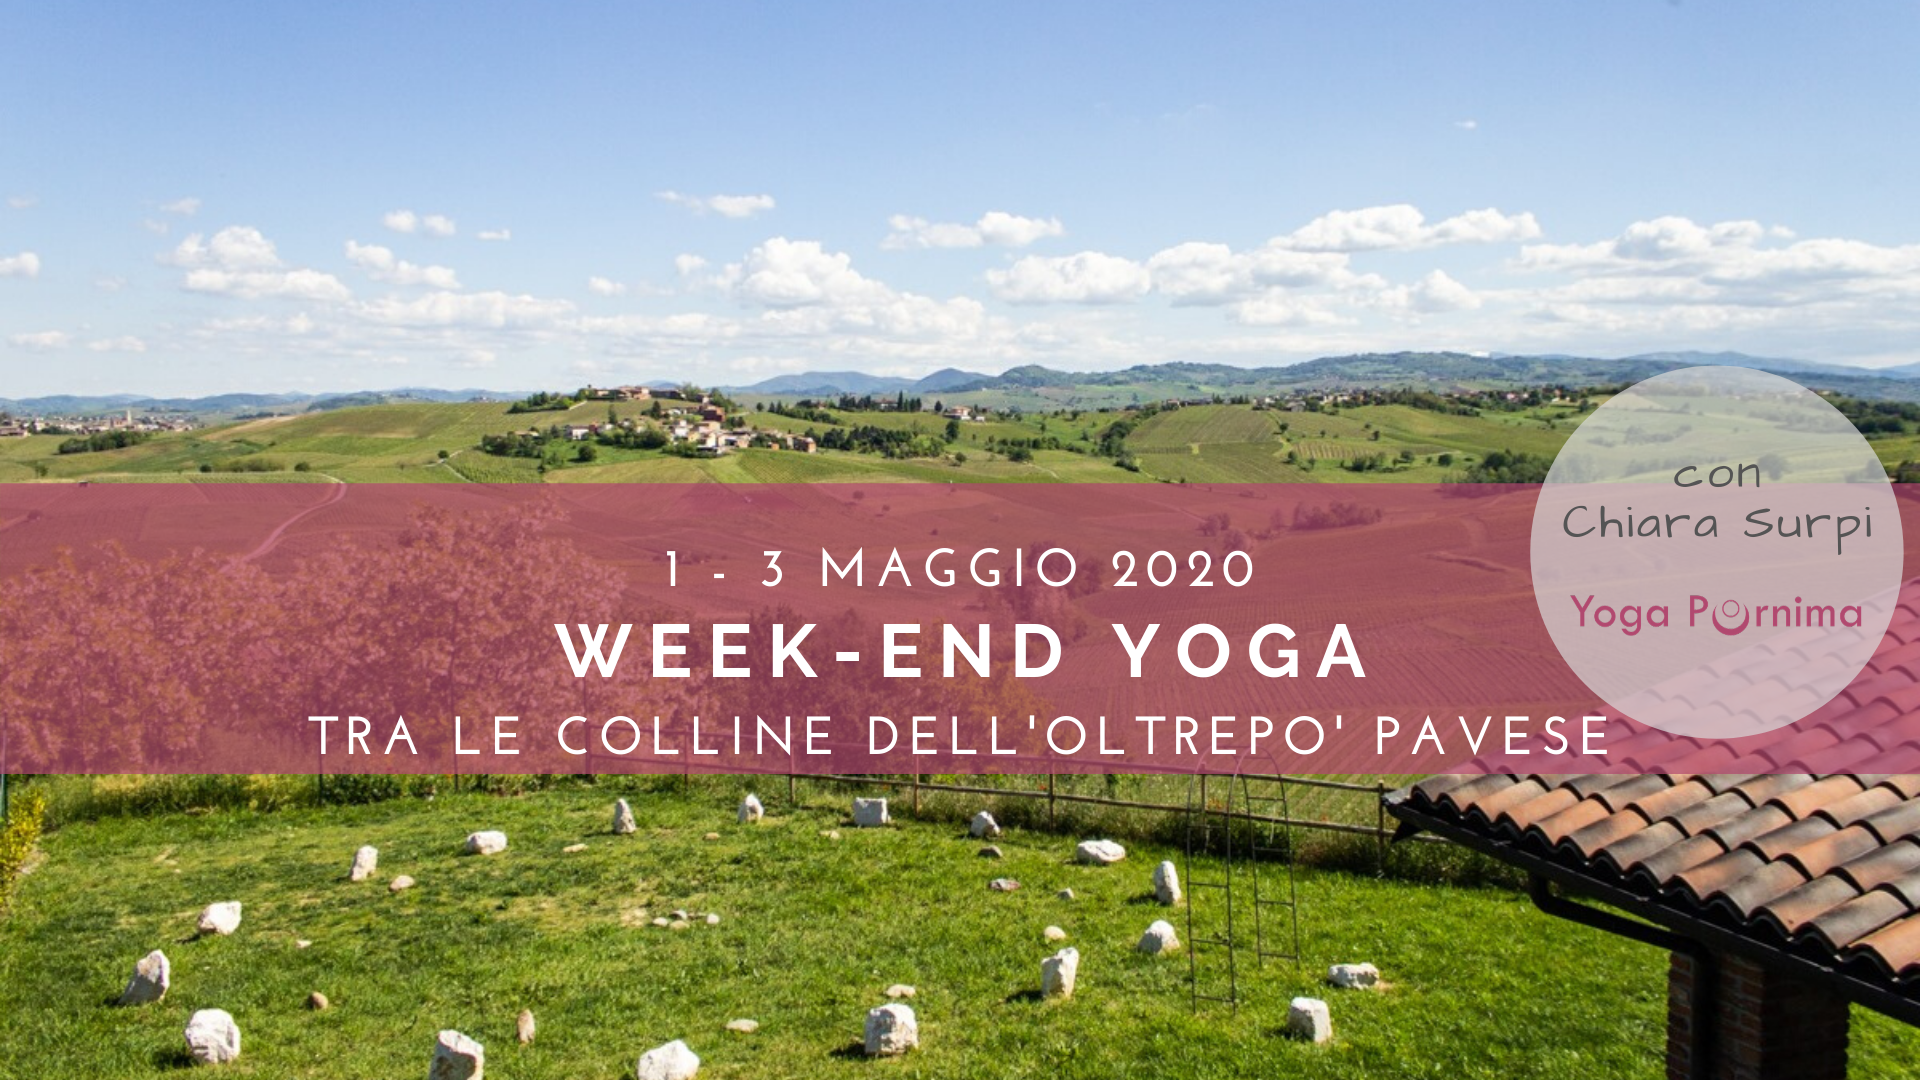 1 – 3 maggio 2020: week-end yoga tra le colline dell’Oltrepò pavese